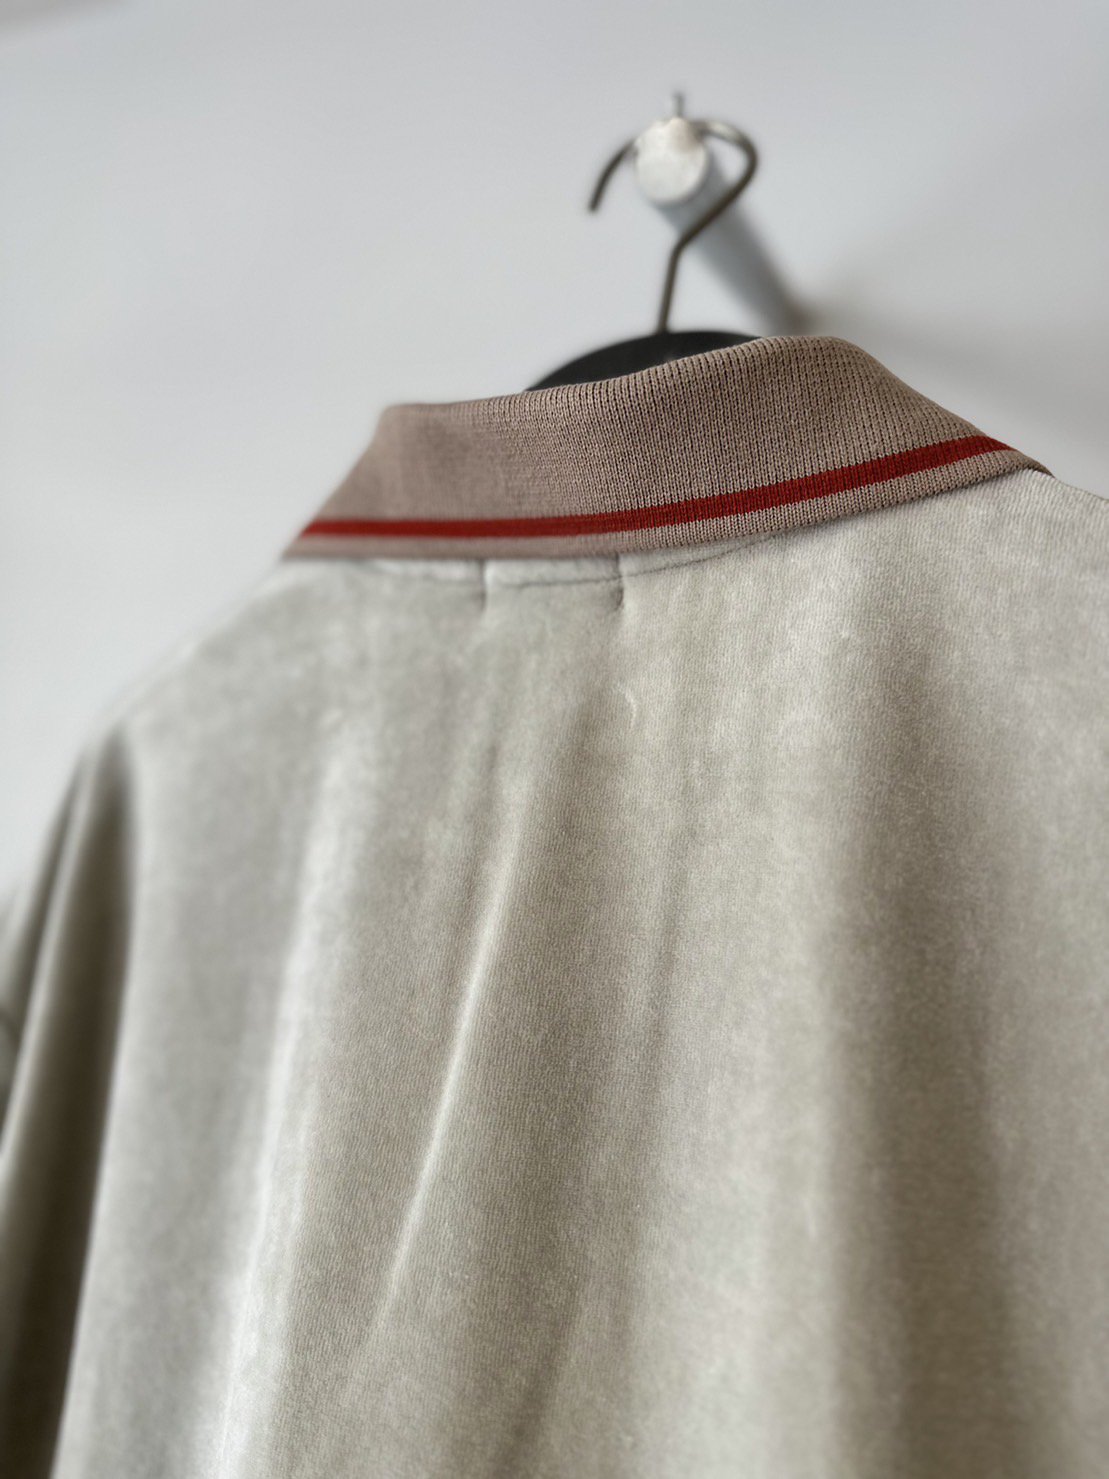 ALLEGE<br />Swich Rib S/S Skipper Cut Sew / Beige<img class='new_mark_img2' src='https://img.shop-pro.jp/img/new/icons14.gif' style='border:none;display:inline;margin:0px;padding:0px;width:auto;' />